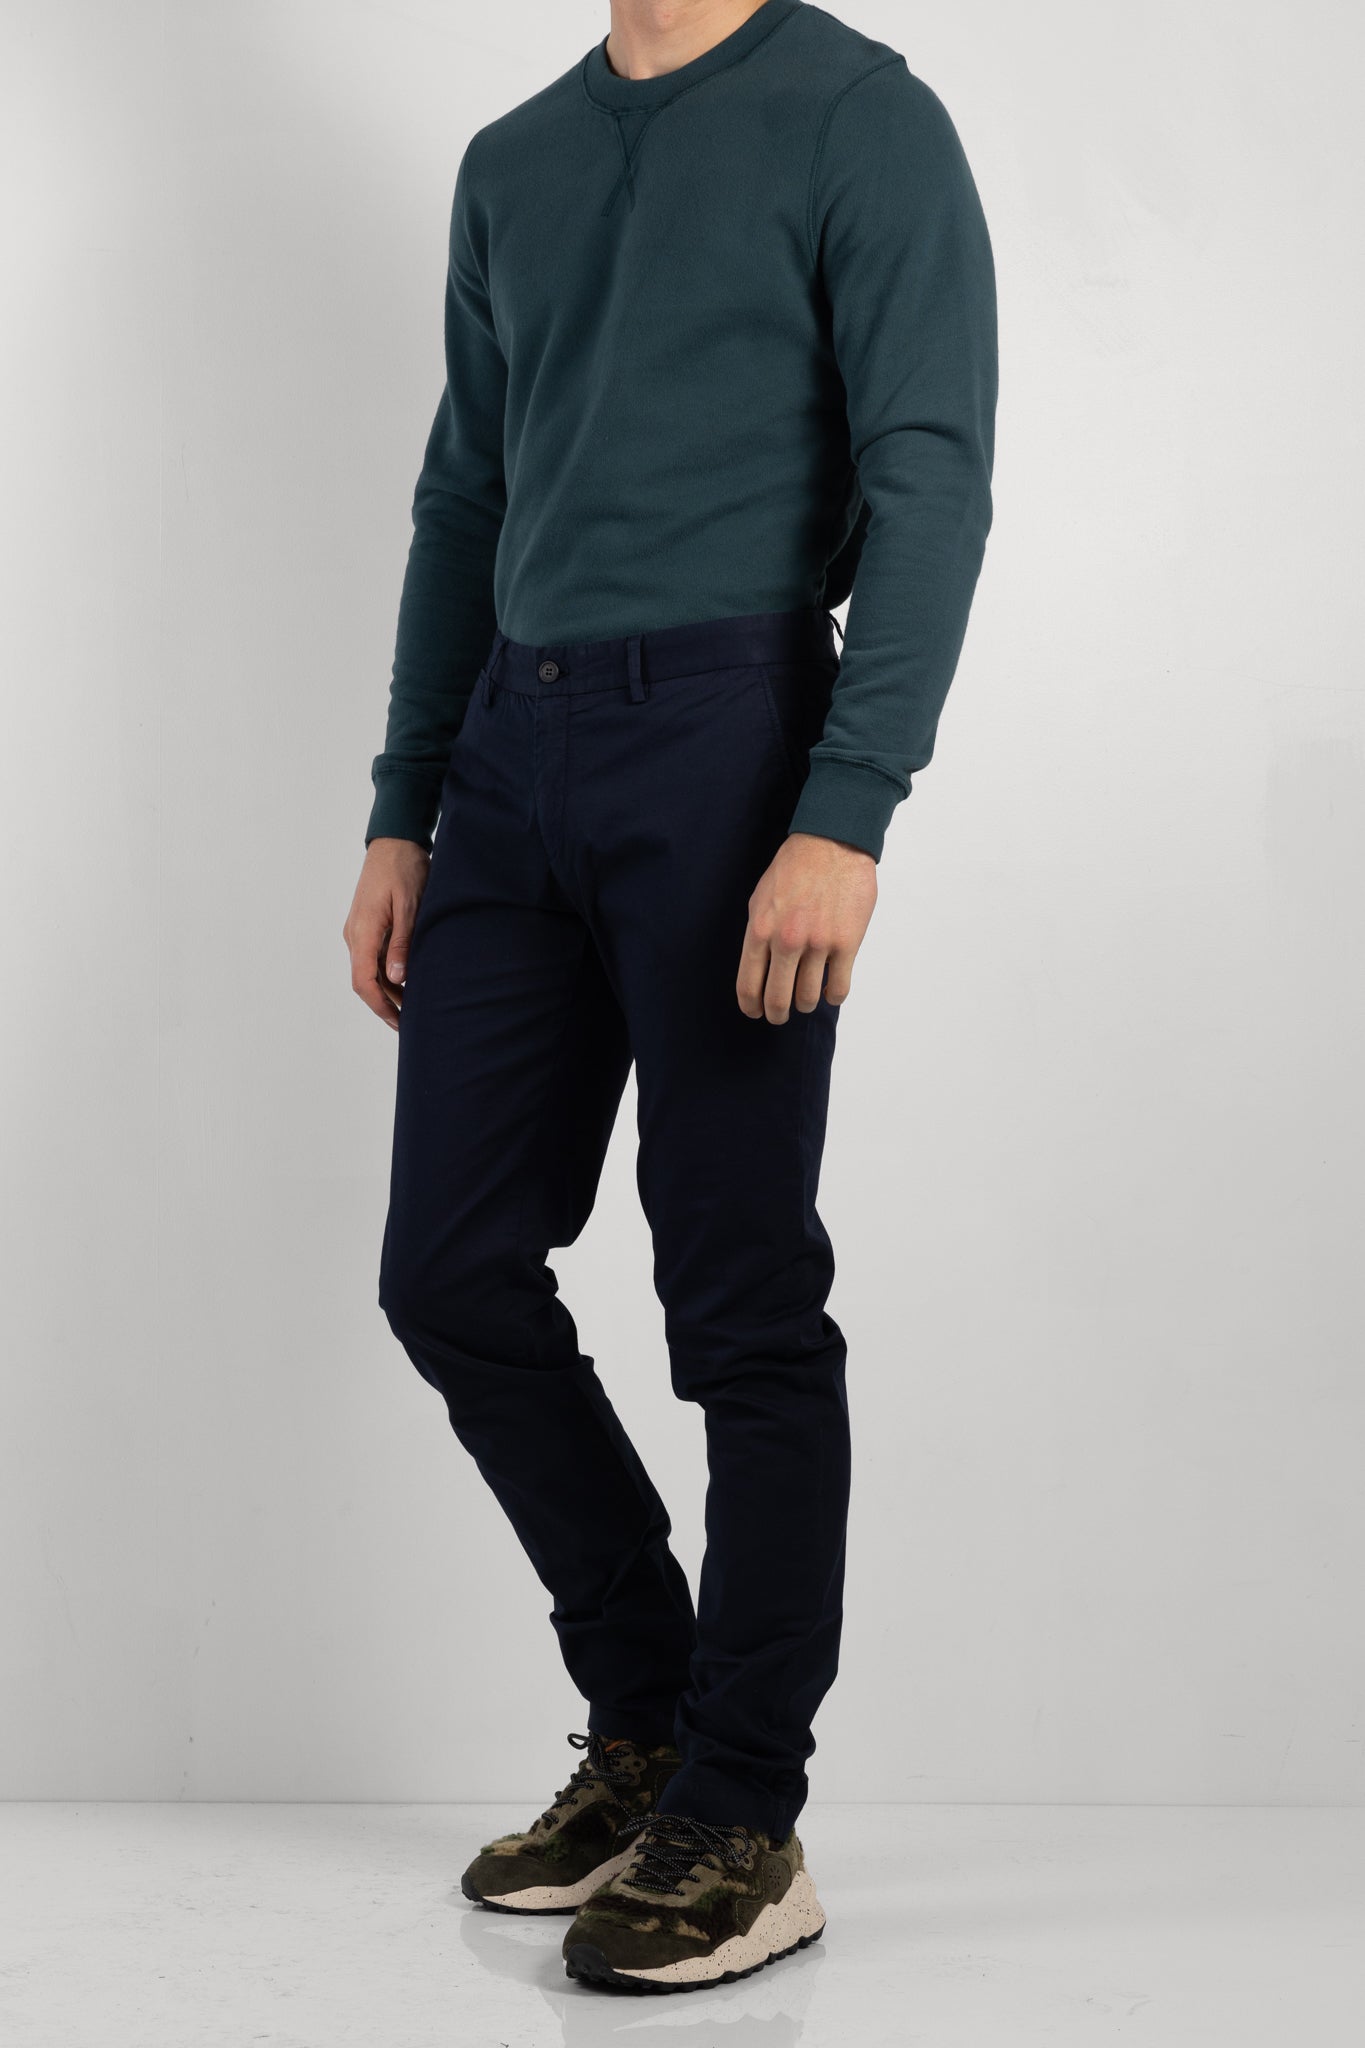 Mens trousers | Sunspel Chinos | The Standard Store